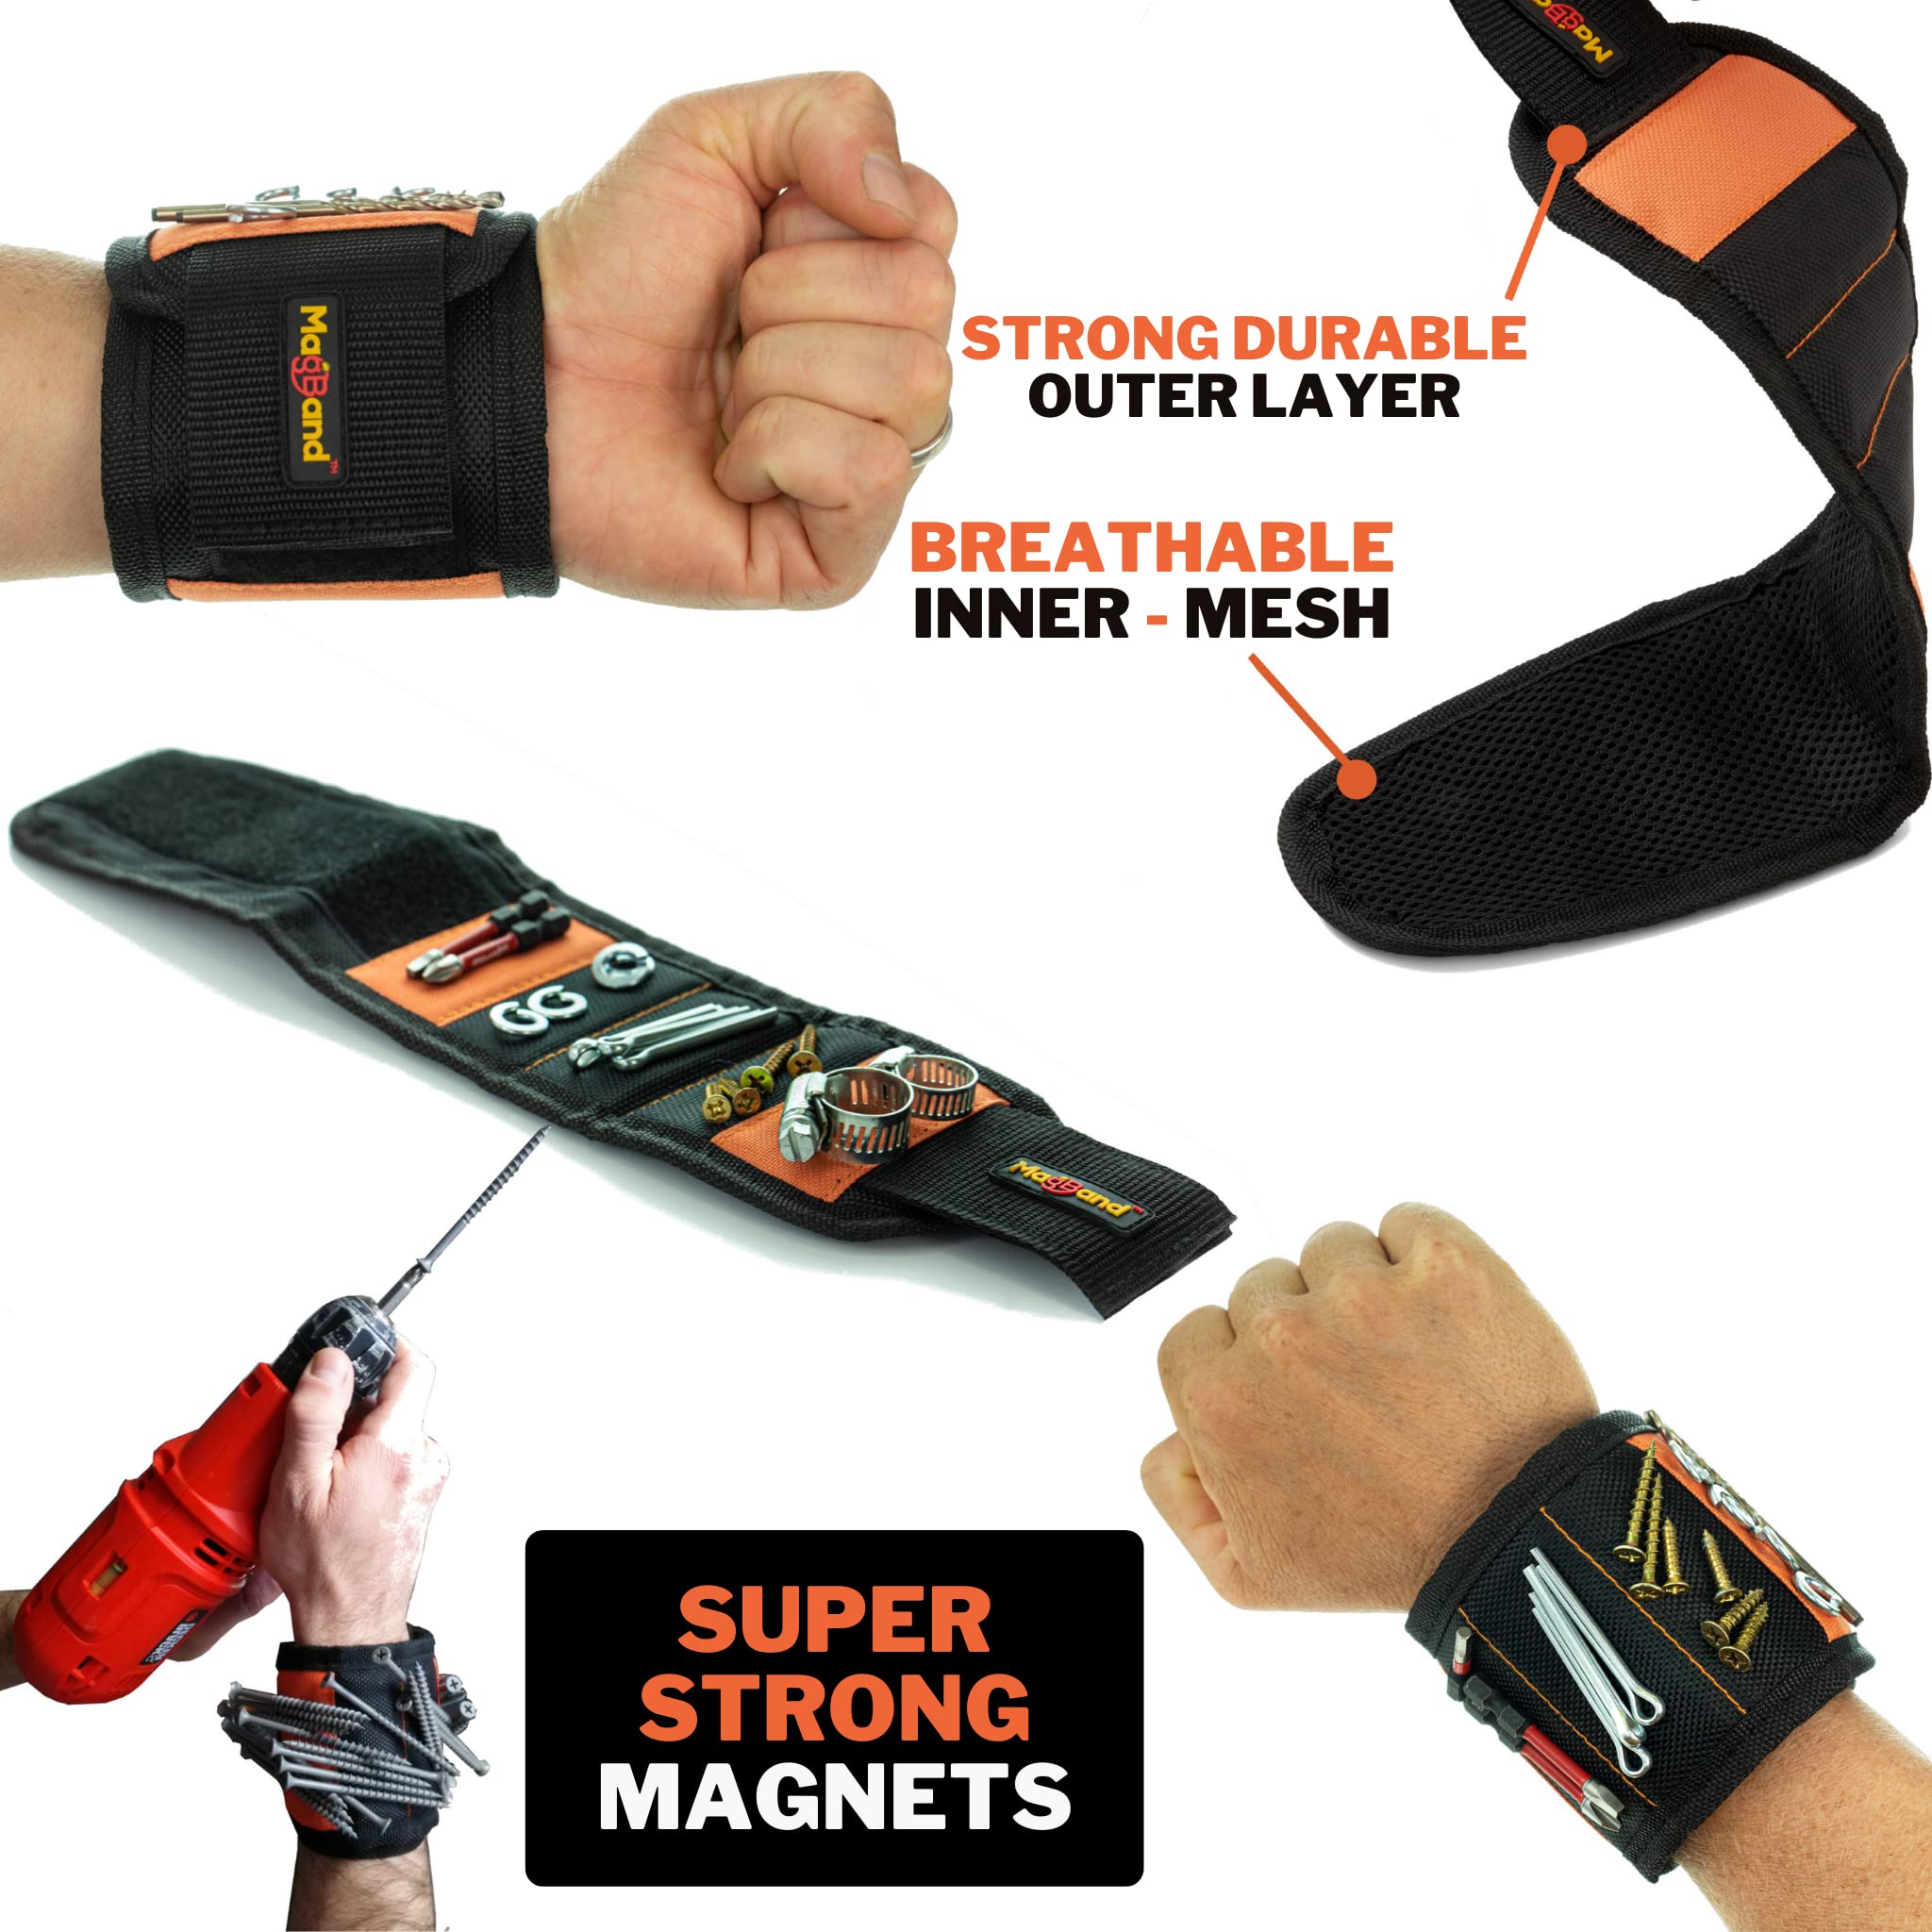 MagBand Magnetic Wristband For Holding Screws, Nails and Drilling Bits - 10 Strong Magnets - Men & Women's Tool Bracelet - Gift Ideas for Dad, Husband, Handyman or Handy Woman